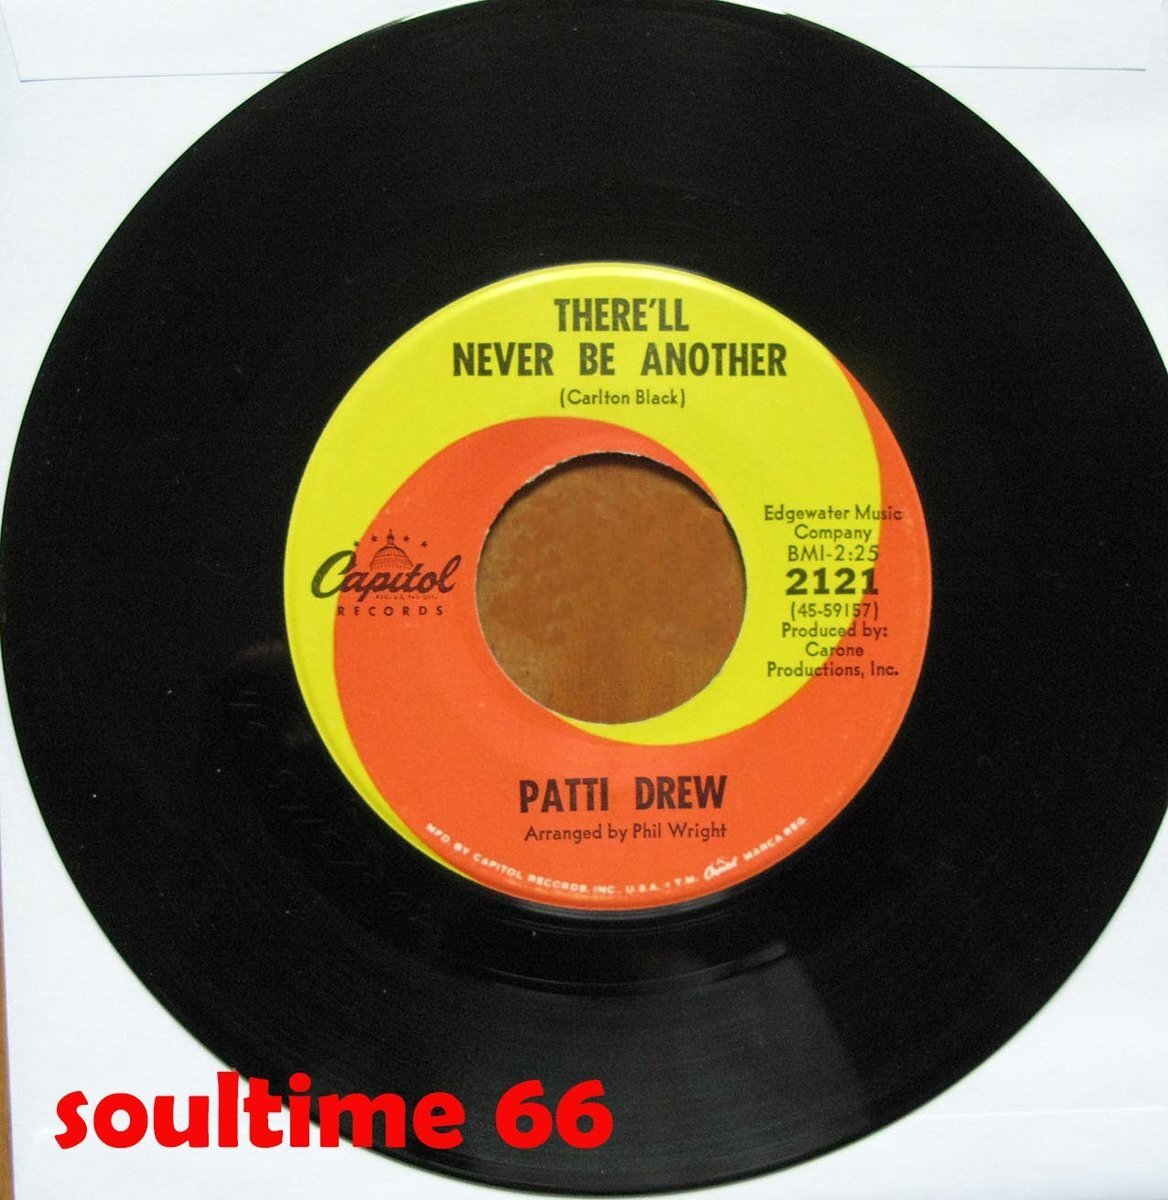 patti drew - there'll never be another